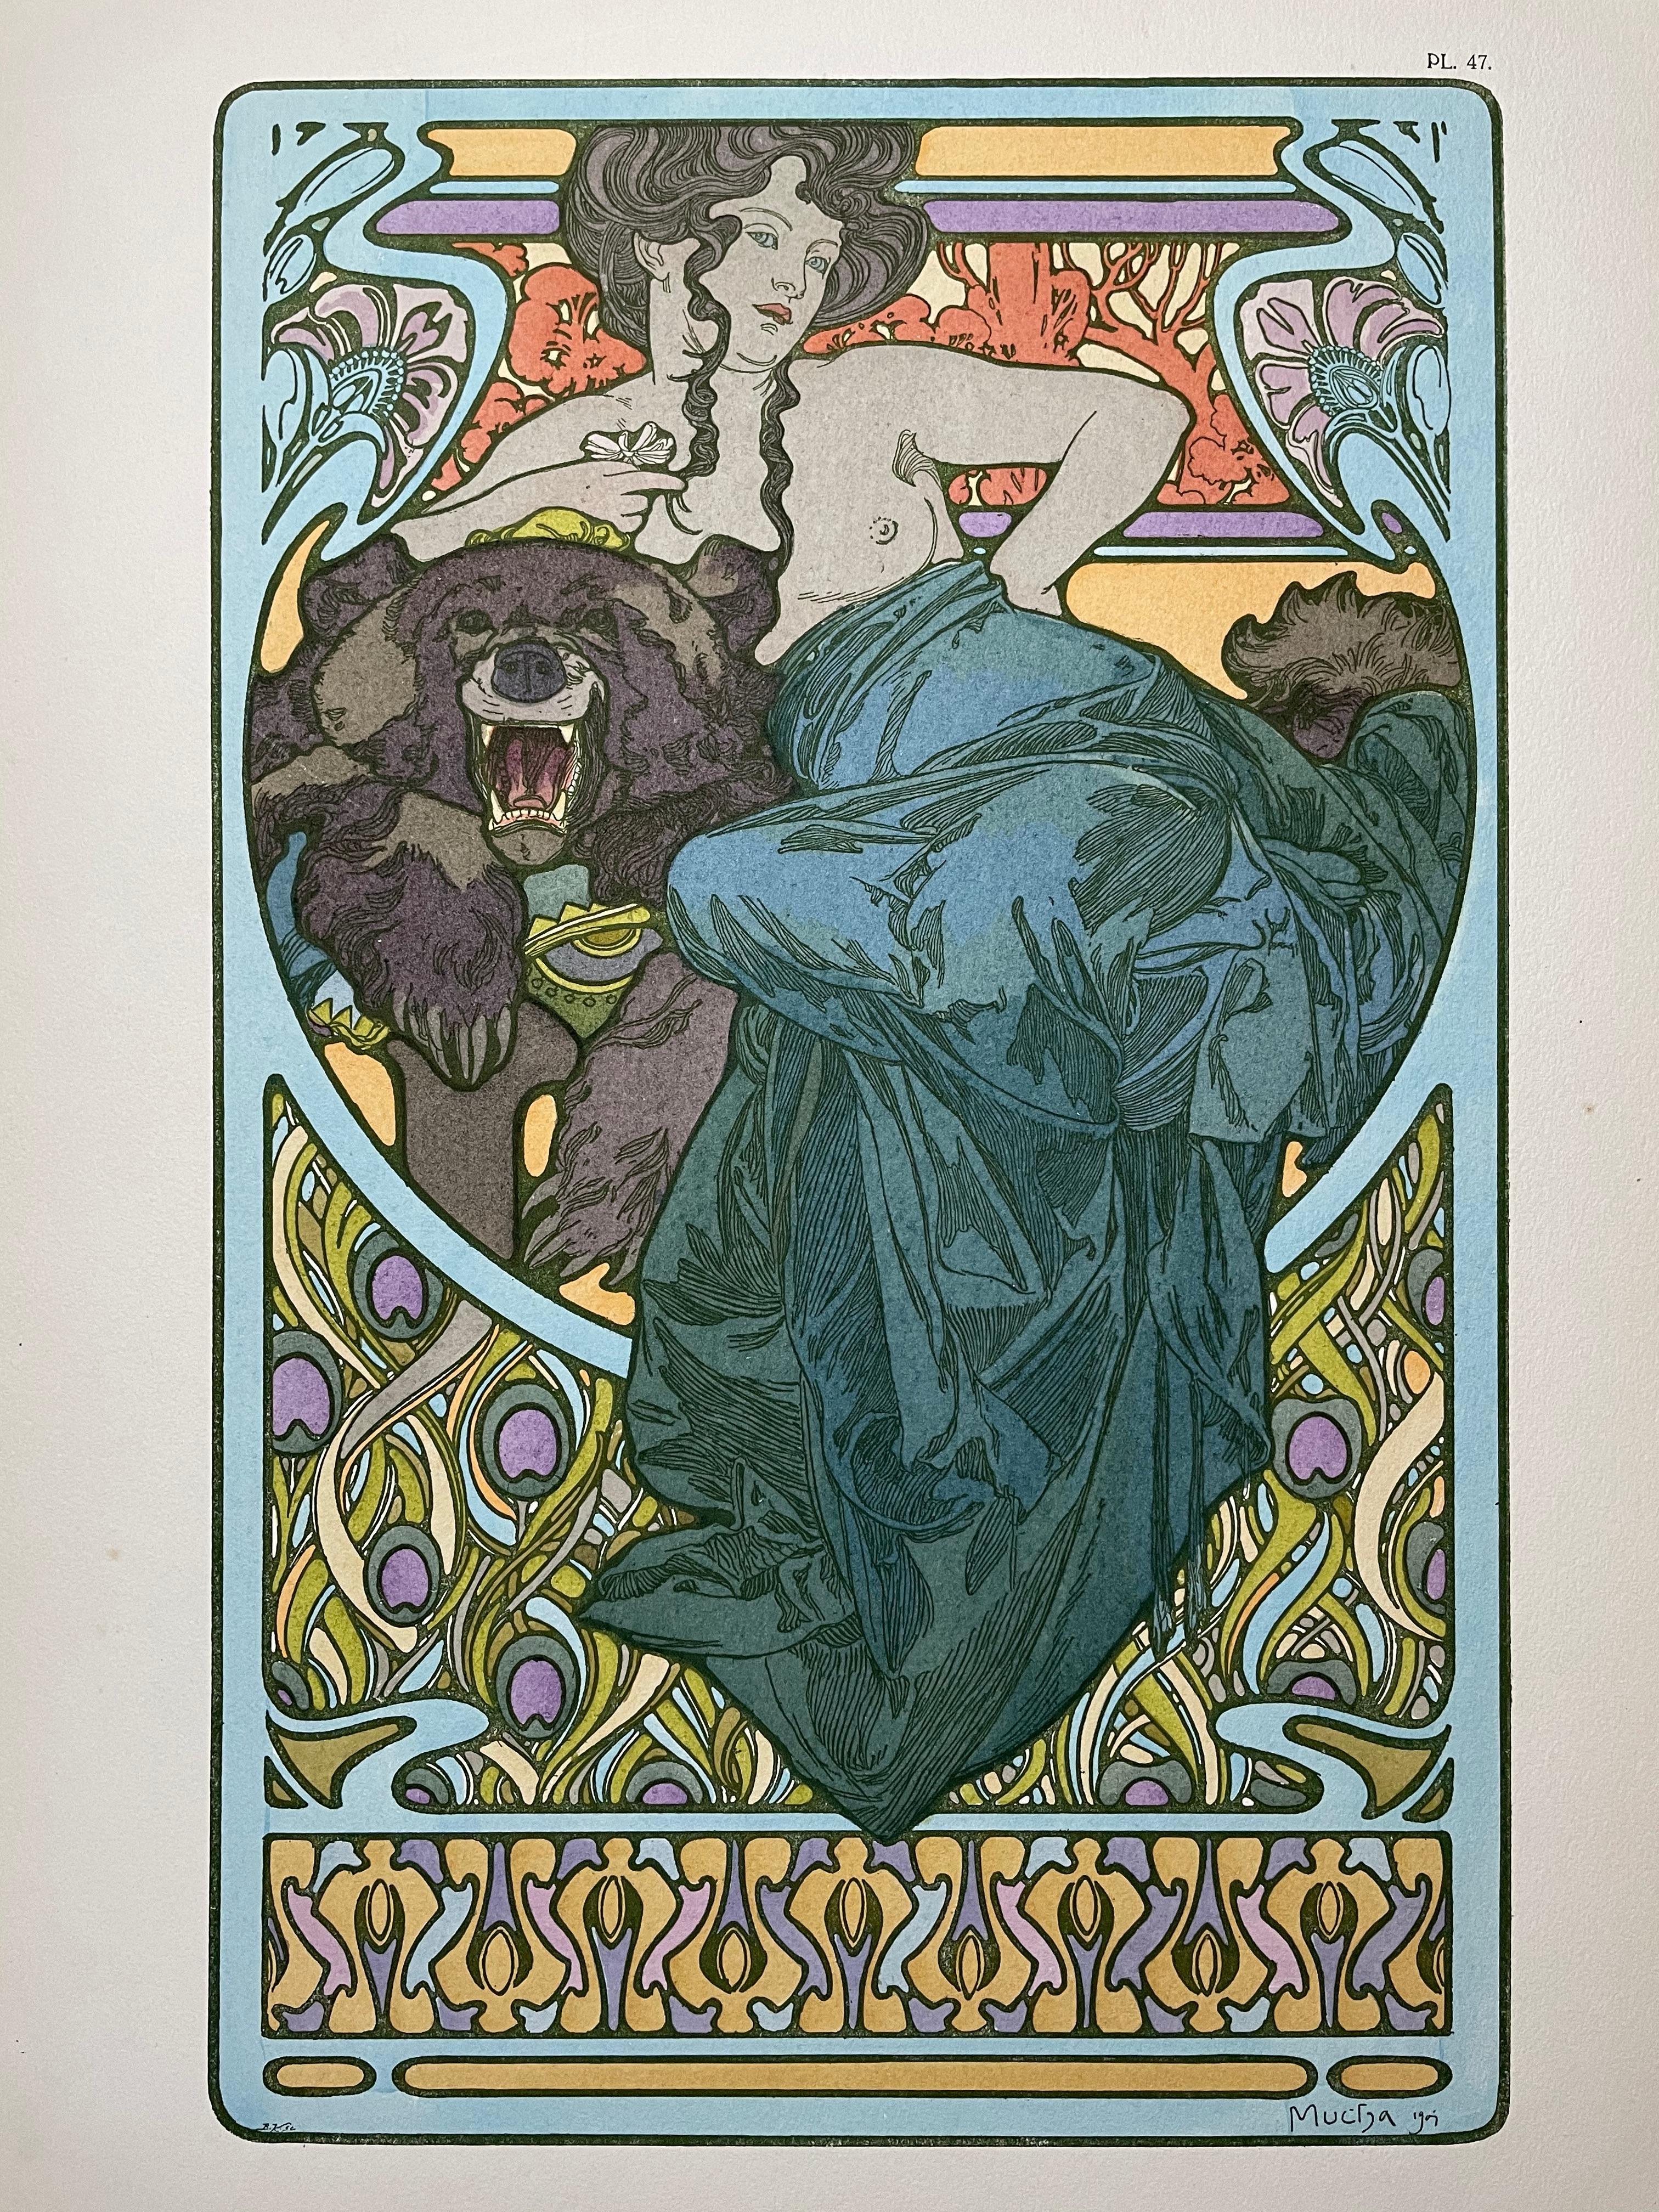 A fine compendium of color and monochrome plates featuring decorative panels and studies by the master of Art Nouveau design, A. M. Mucha. Subject matter includes architecture, female figures, flowers, jewelry, dinnerware, and flatware. ‘Documents